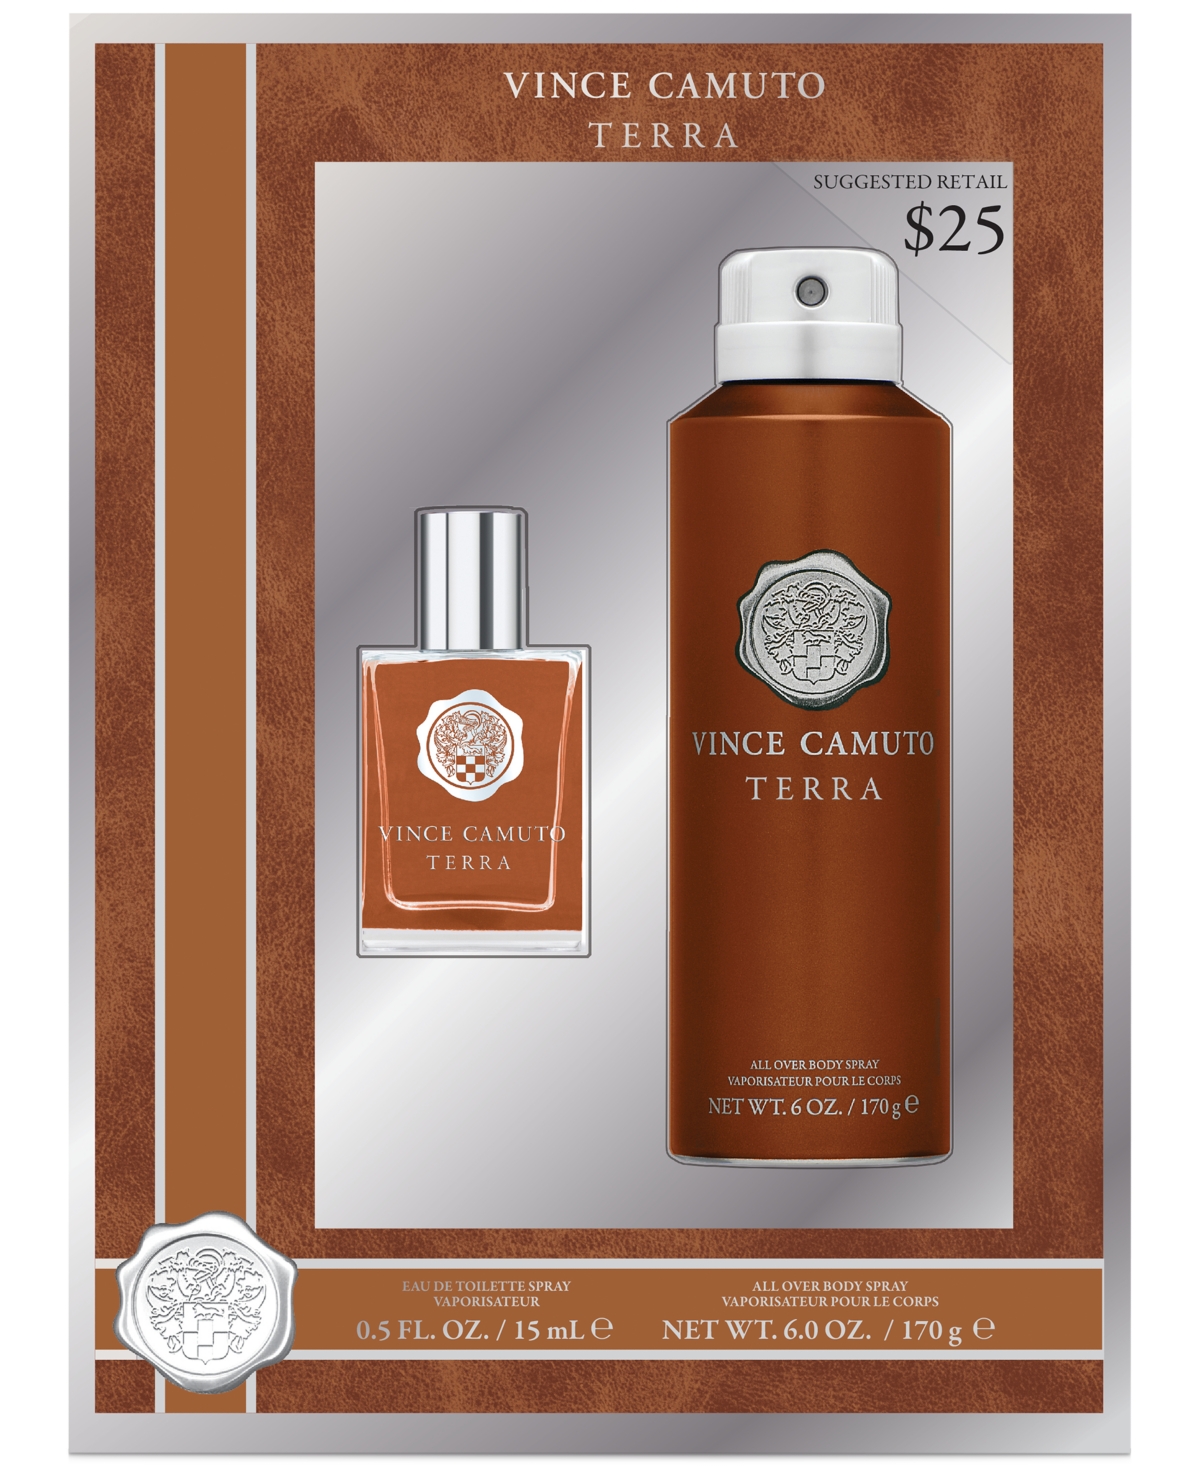 Live - Vince Camuto Terra Full Fragrance Review